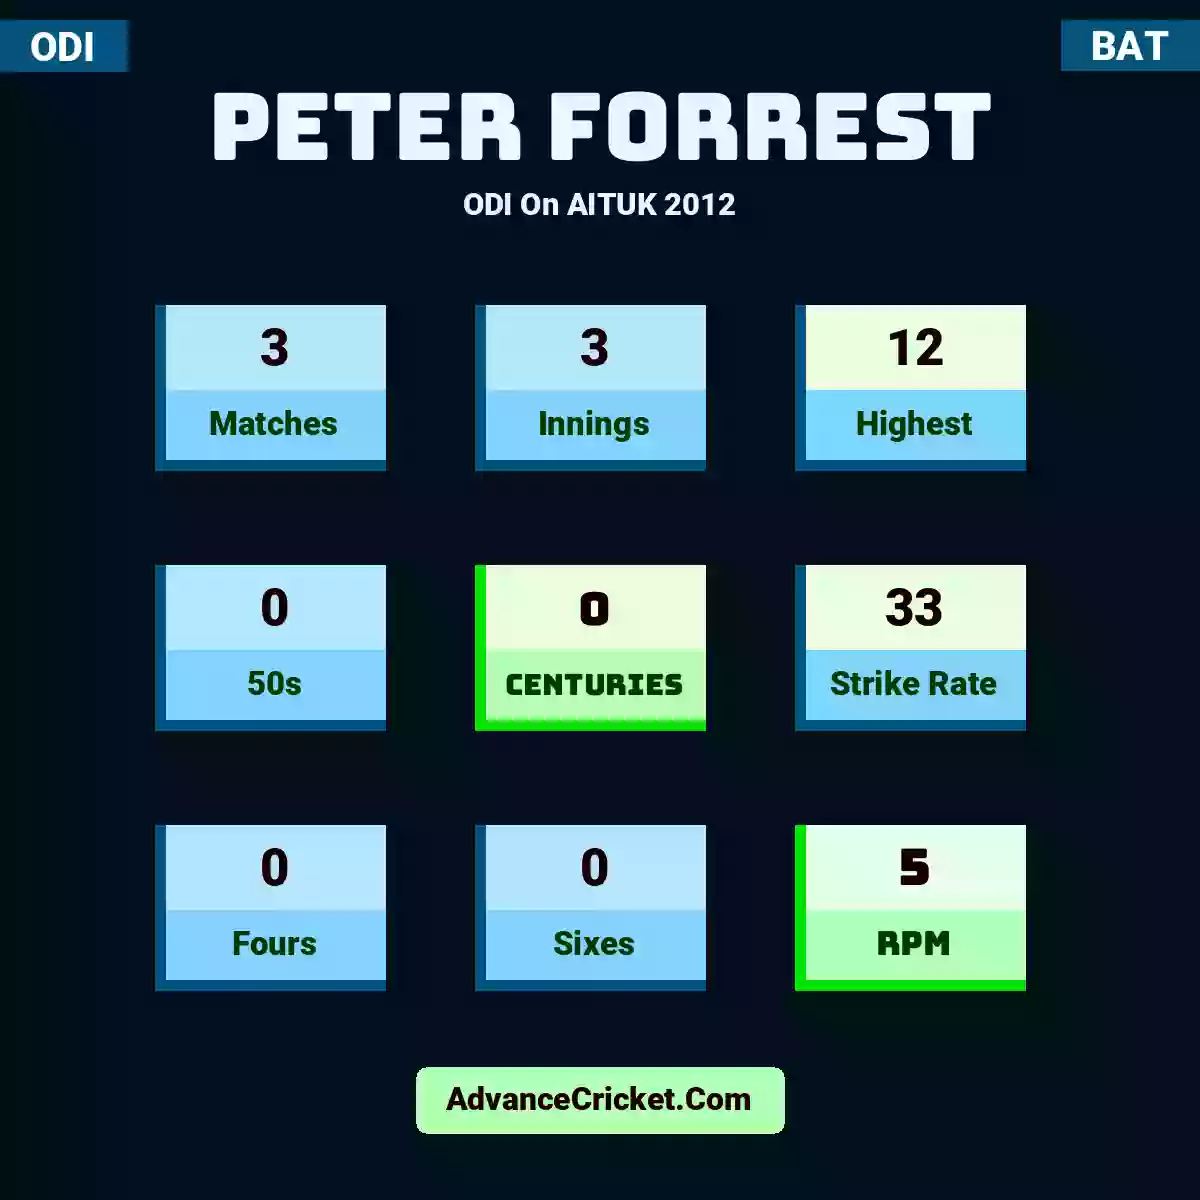 Peter Forrest ODI  On AITUK 2012, Peter Forrest played 3 matches, scored 12 runs as highest, 0 half-centuries, and 0 centuries, with a strike rate of 33. P.Forrest hit 0 fours and 0 sixes, with an RPM of 5.